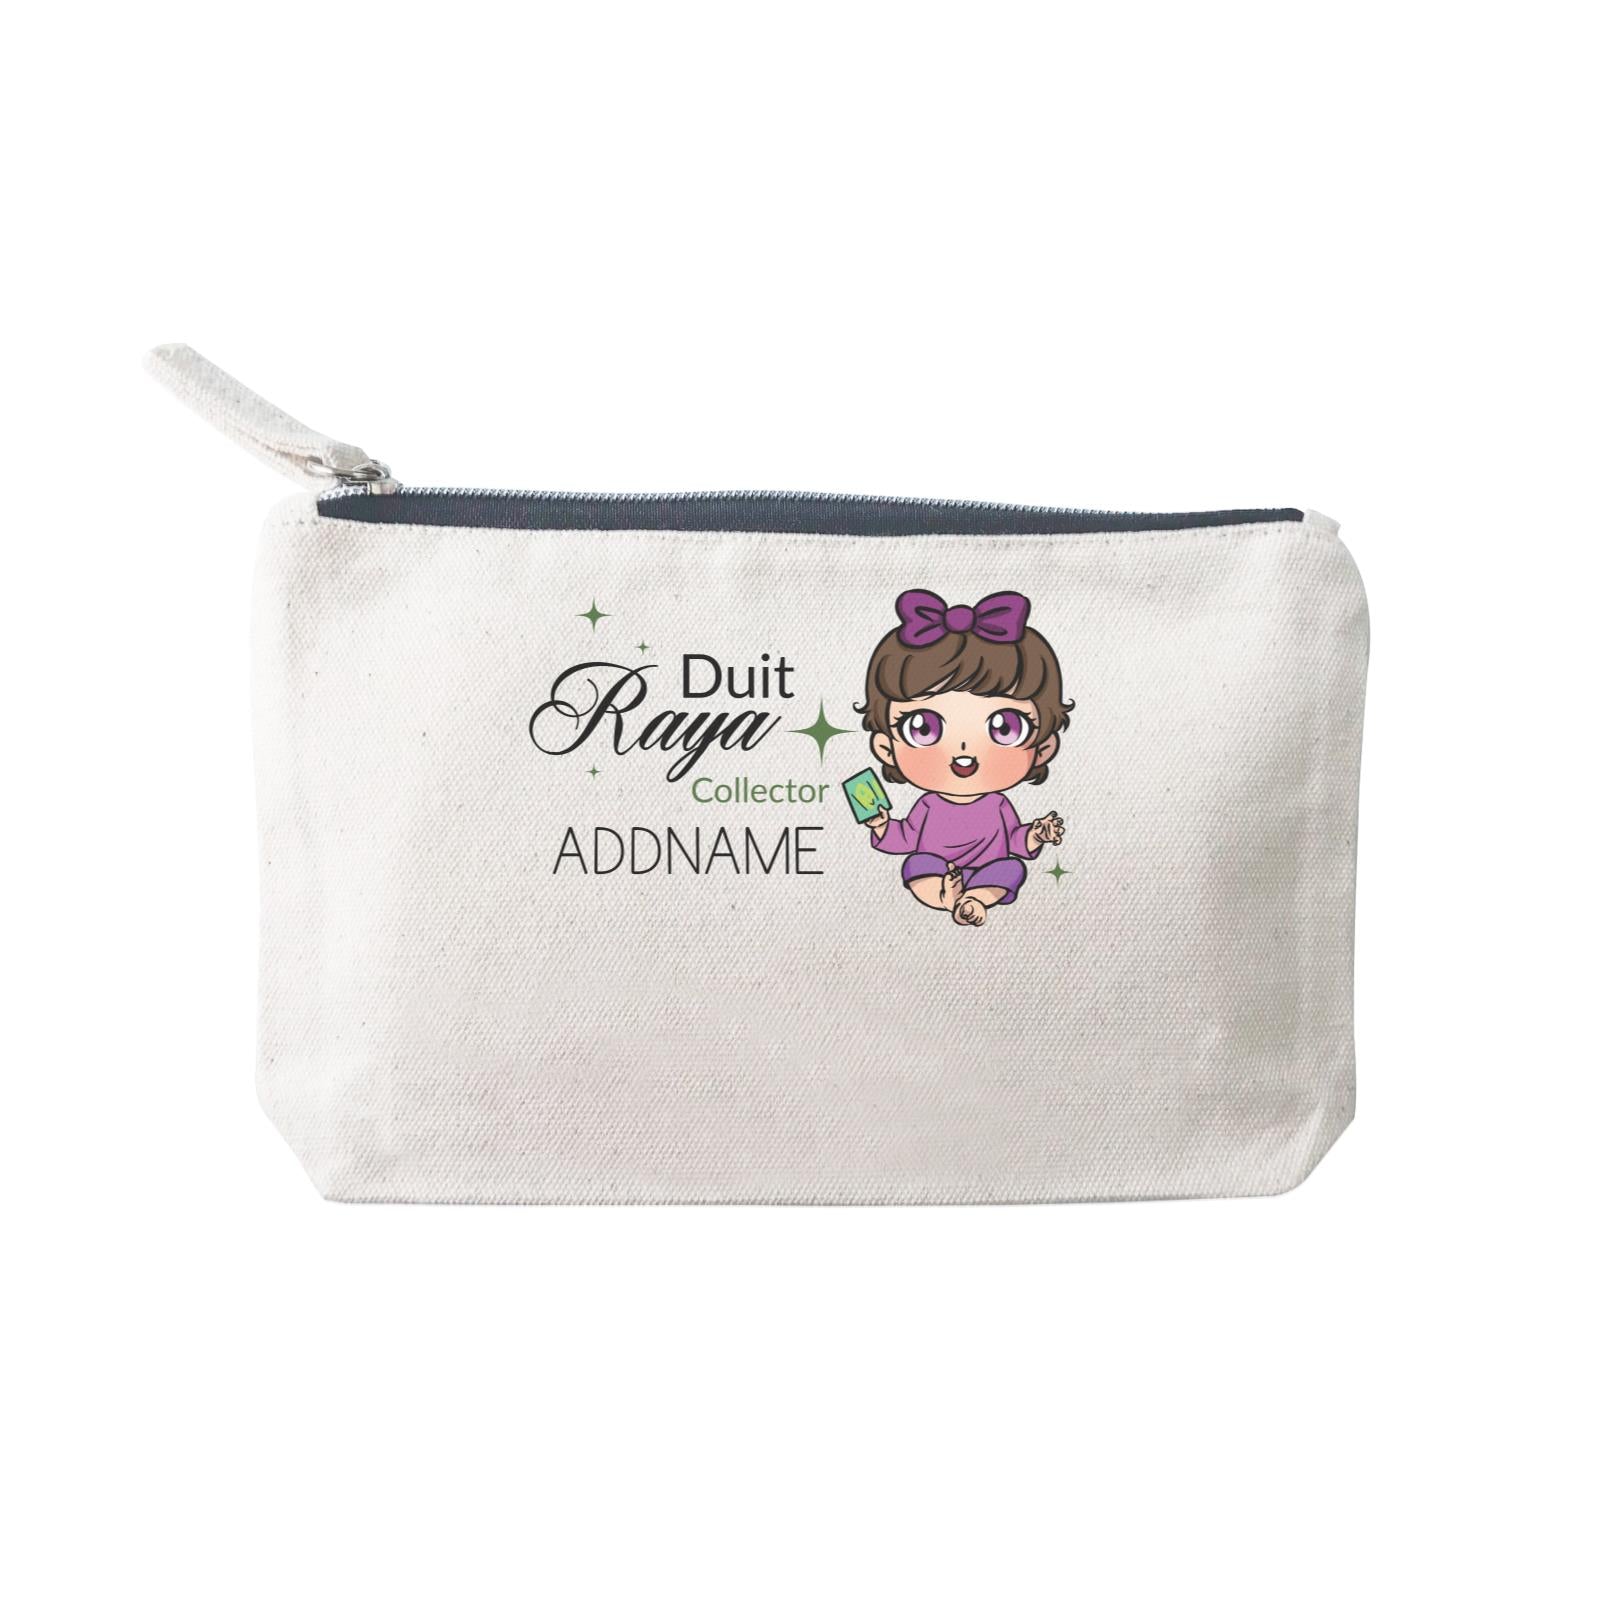 Raya Chibi Baby Baby Girl Duit Raya Collector Addname Mini Accessories Stationery Pouch 2